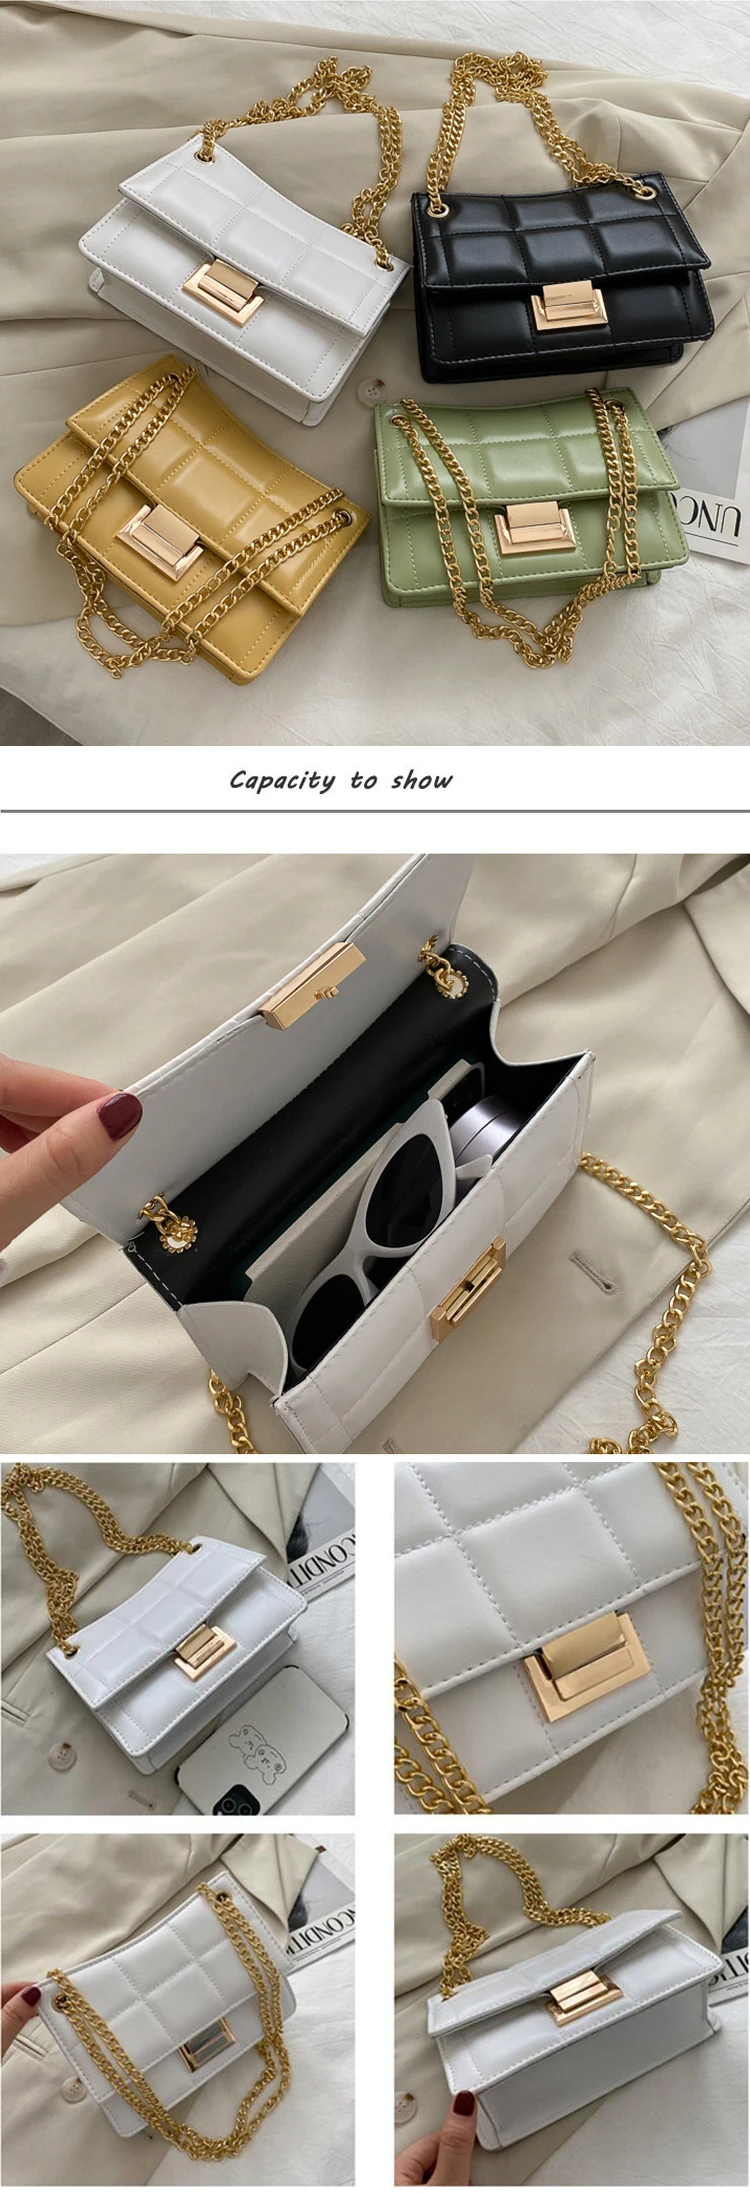 2021 luxury latest style ladies crossbody bag single shoulder chain handbags pu leather tote hand bags for women